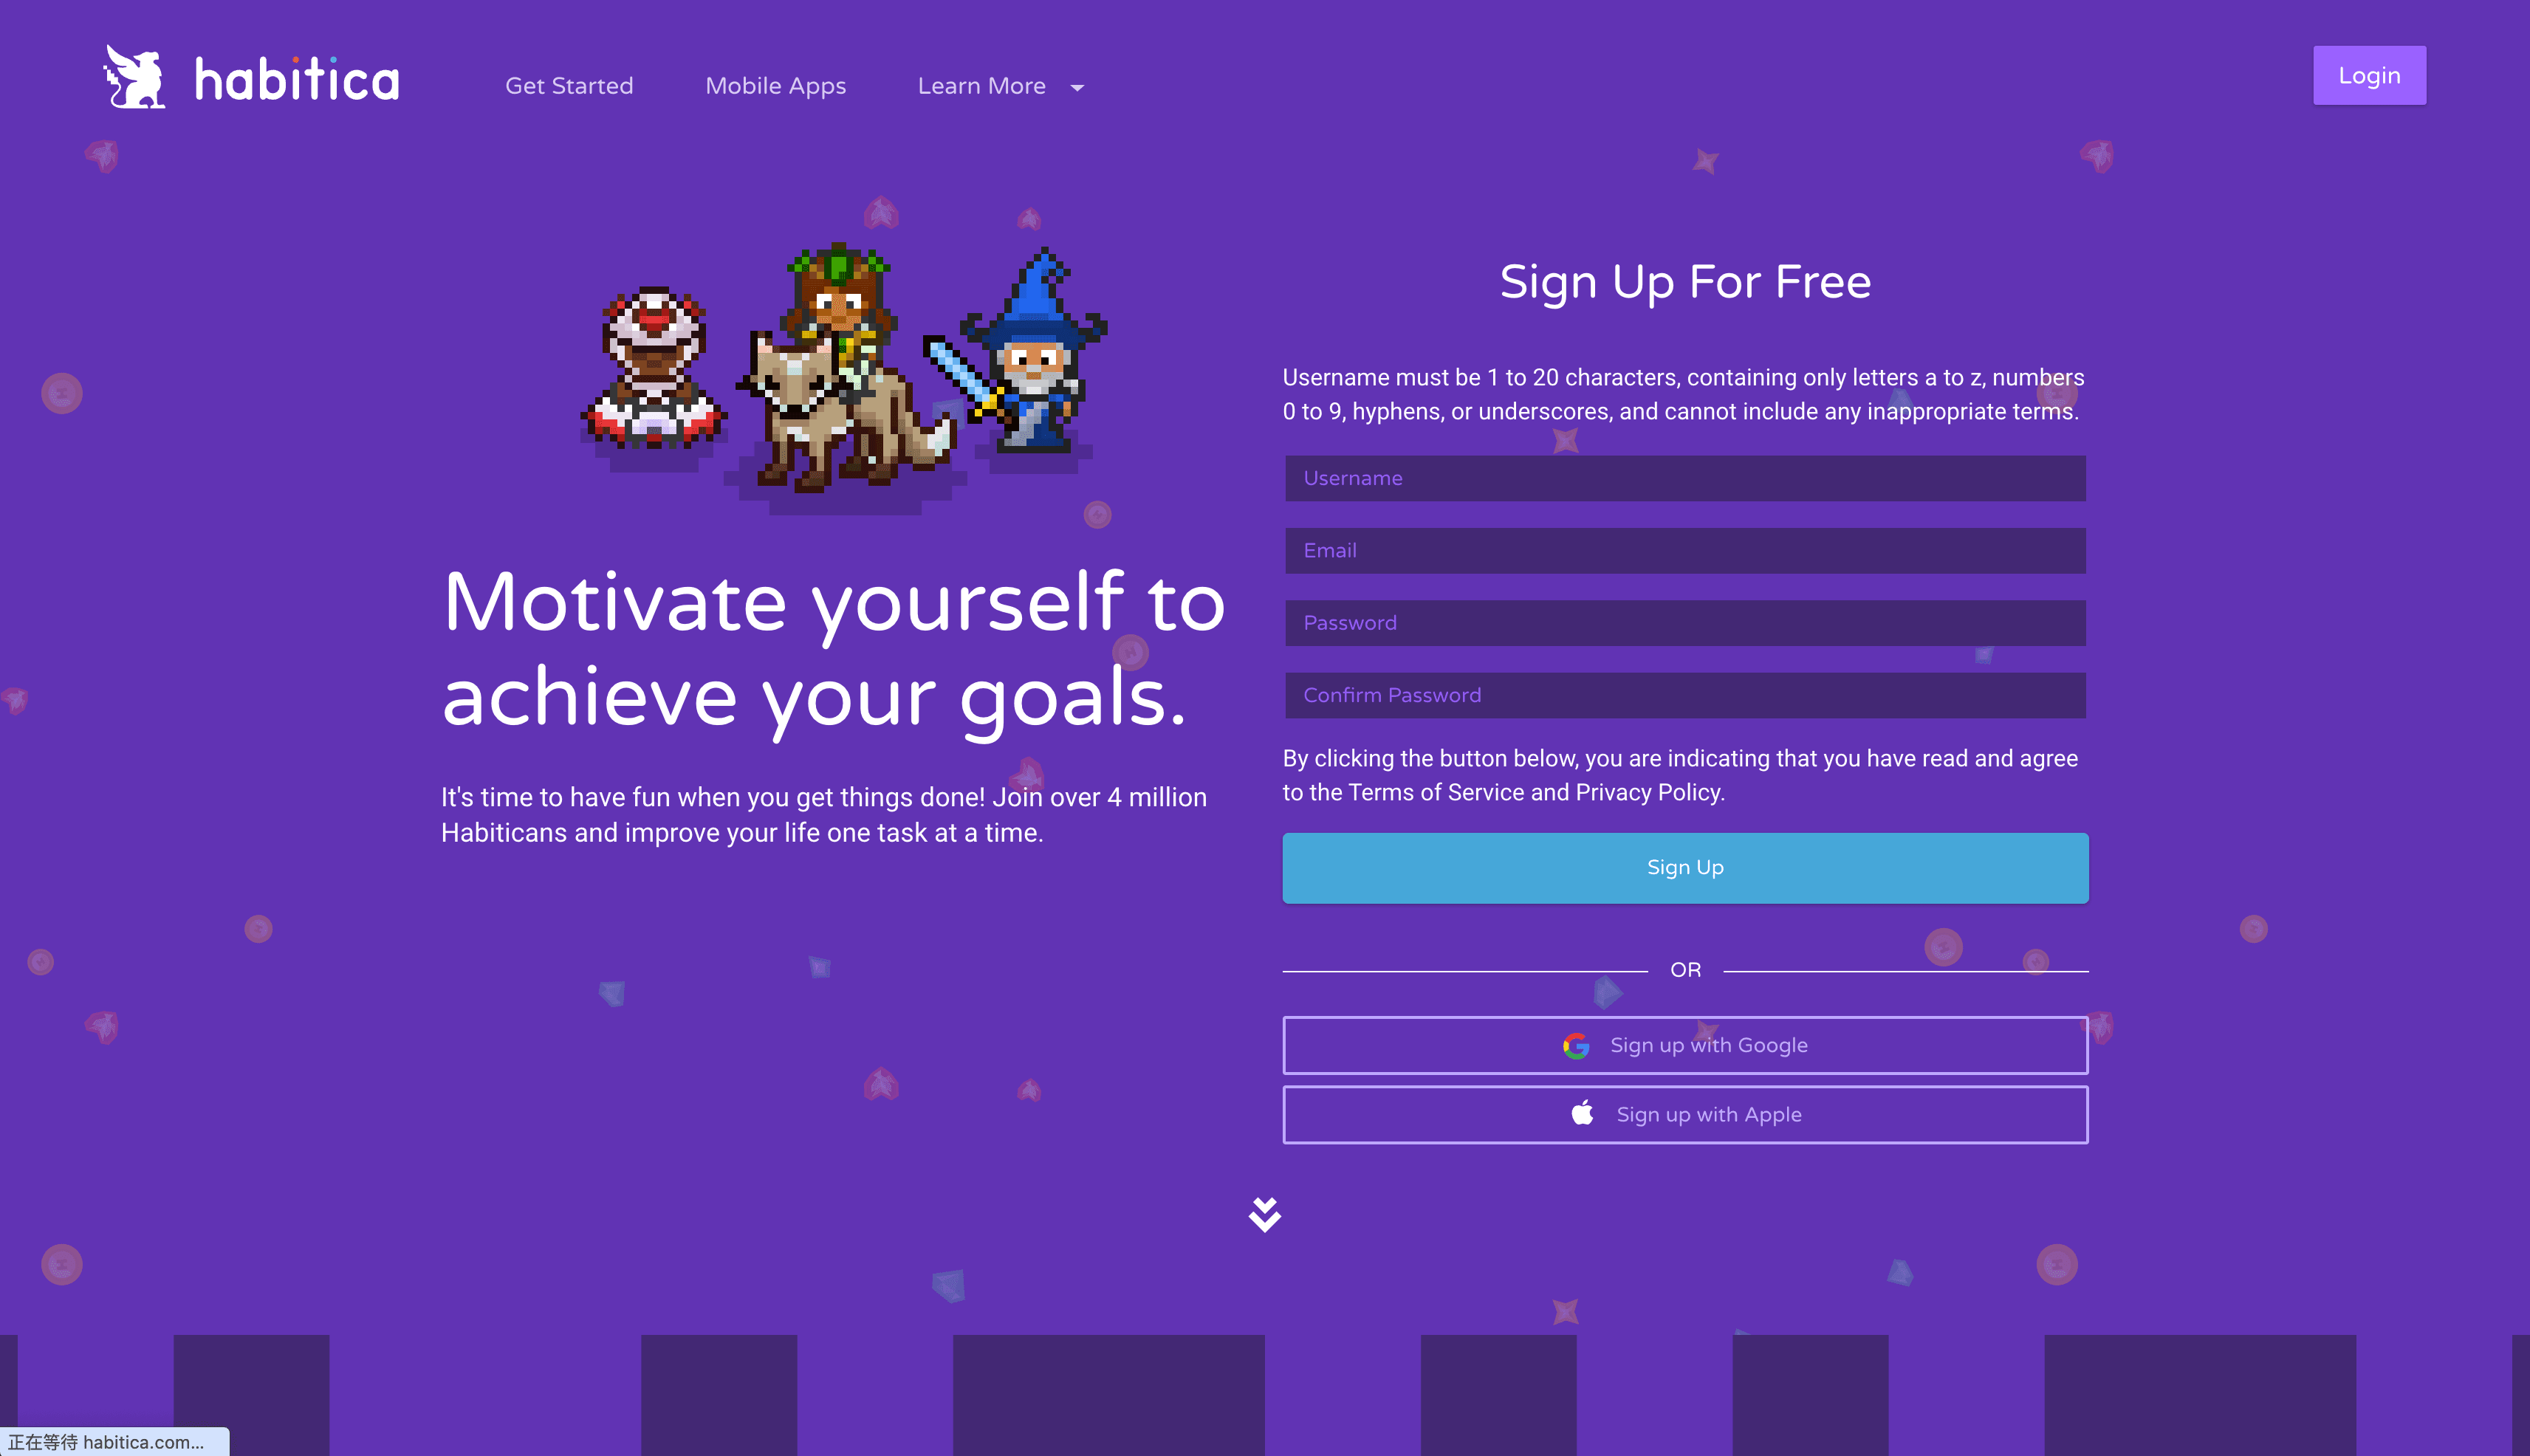 Habitica is a free habit and productivity app that treats your real life like a game. Habitica can help you achieve your goals to become healthy and happy.